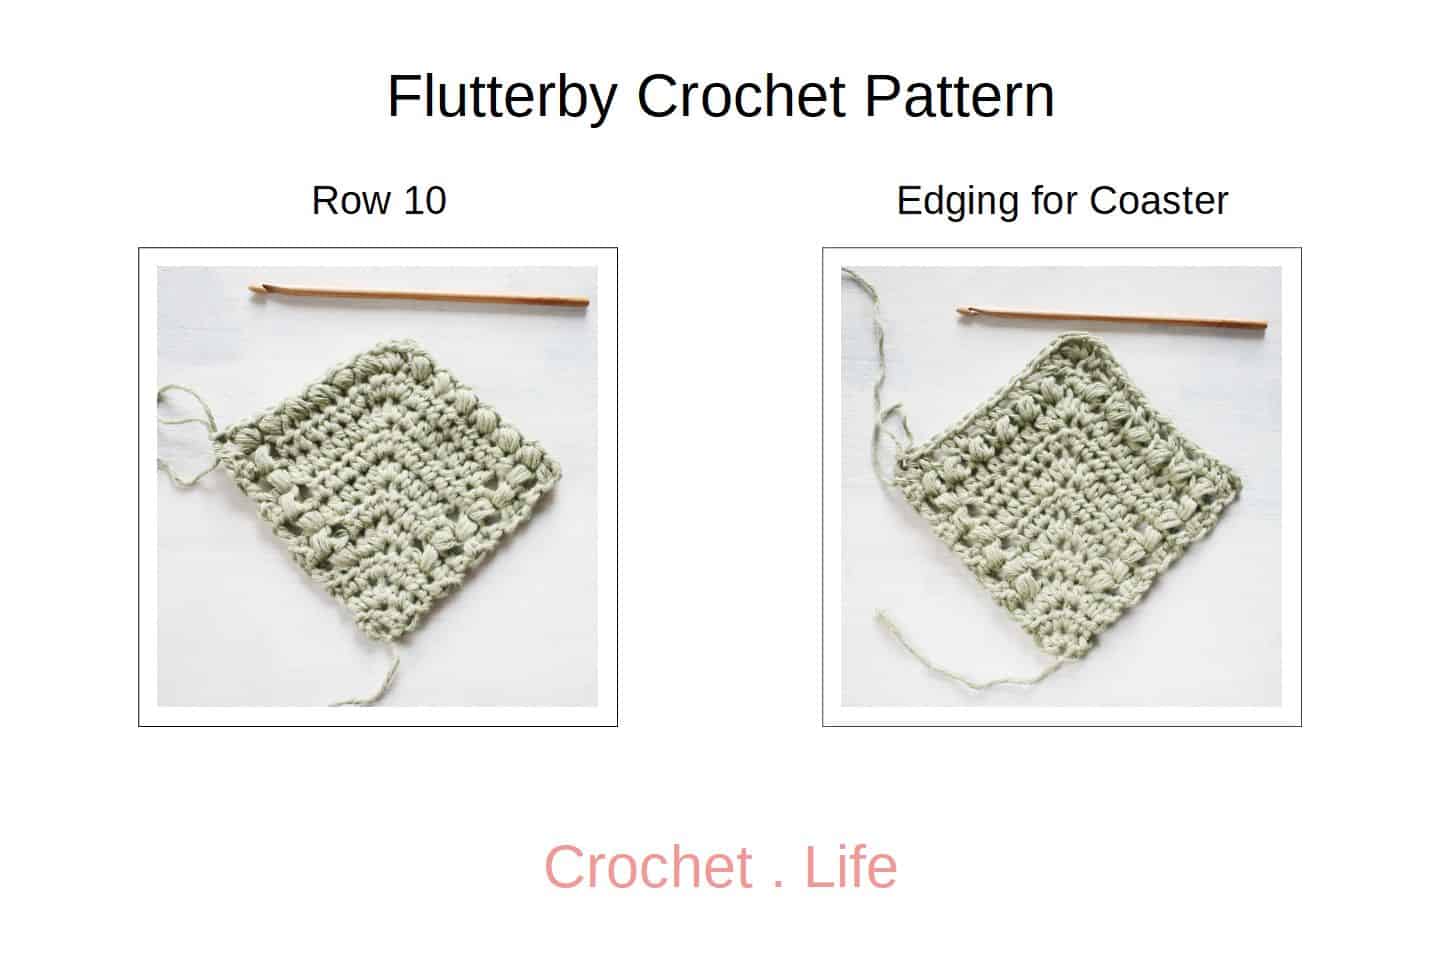 Flutterby Row 10 and Edging for Coaster